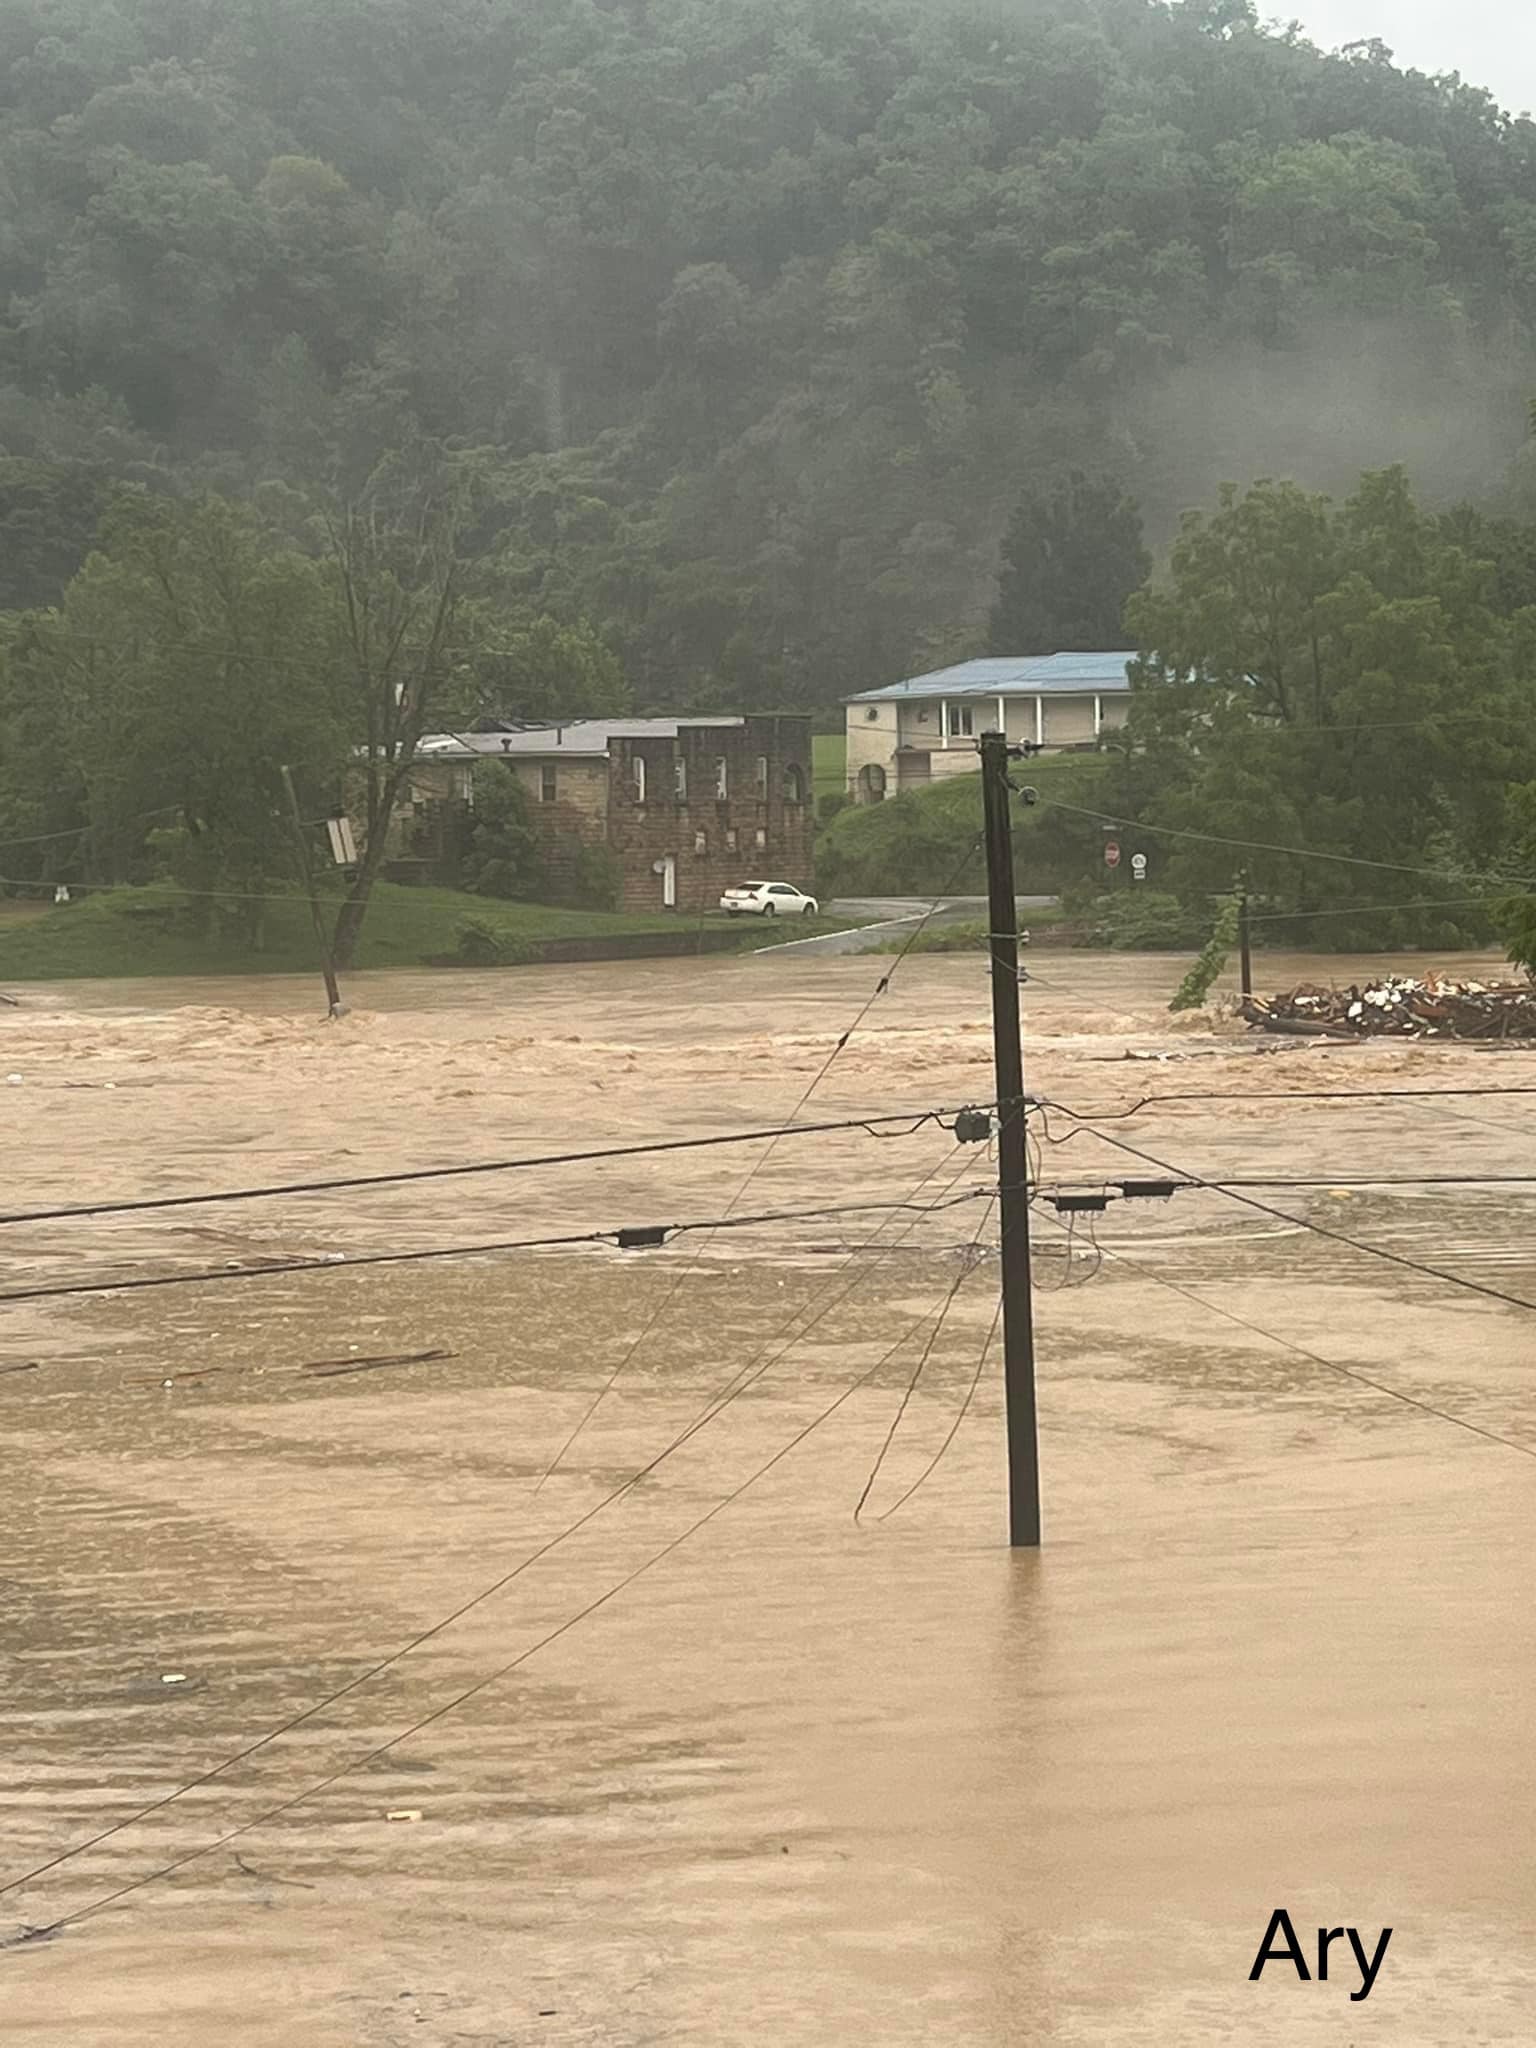 Pigeonroost-Bulan Rd flooded in Ary, KY due to flash flooding